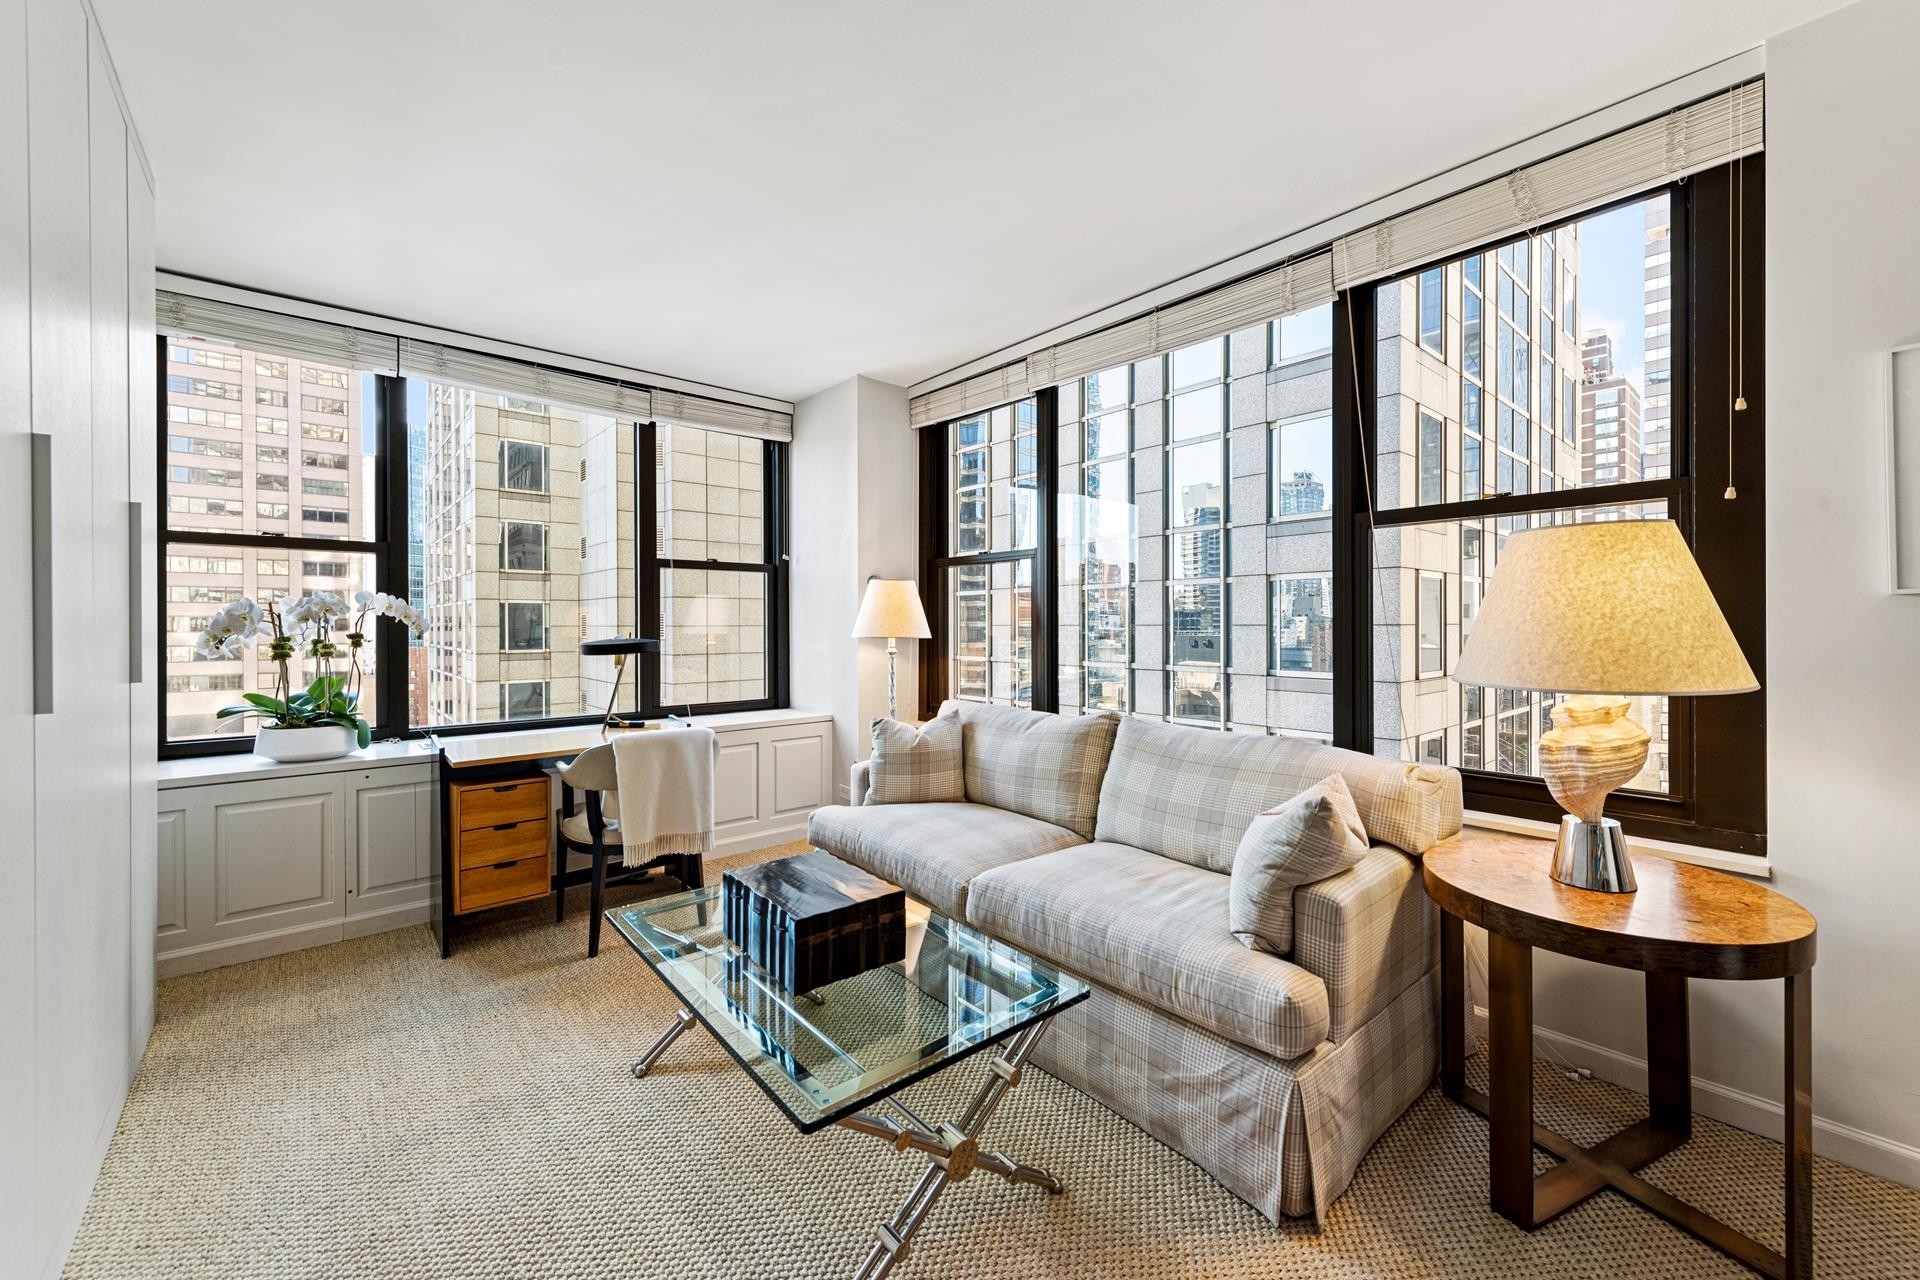 2. Condominiums for Sale at 117 E 57TH ST, 21A Midtown East, New York, NY 10022